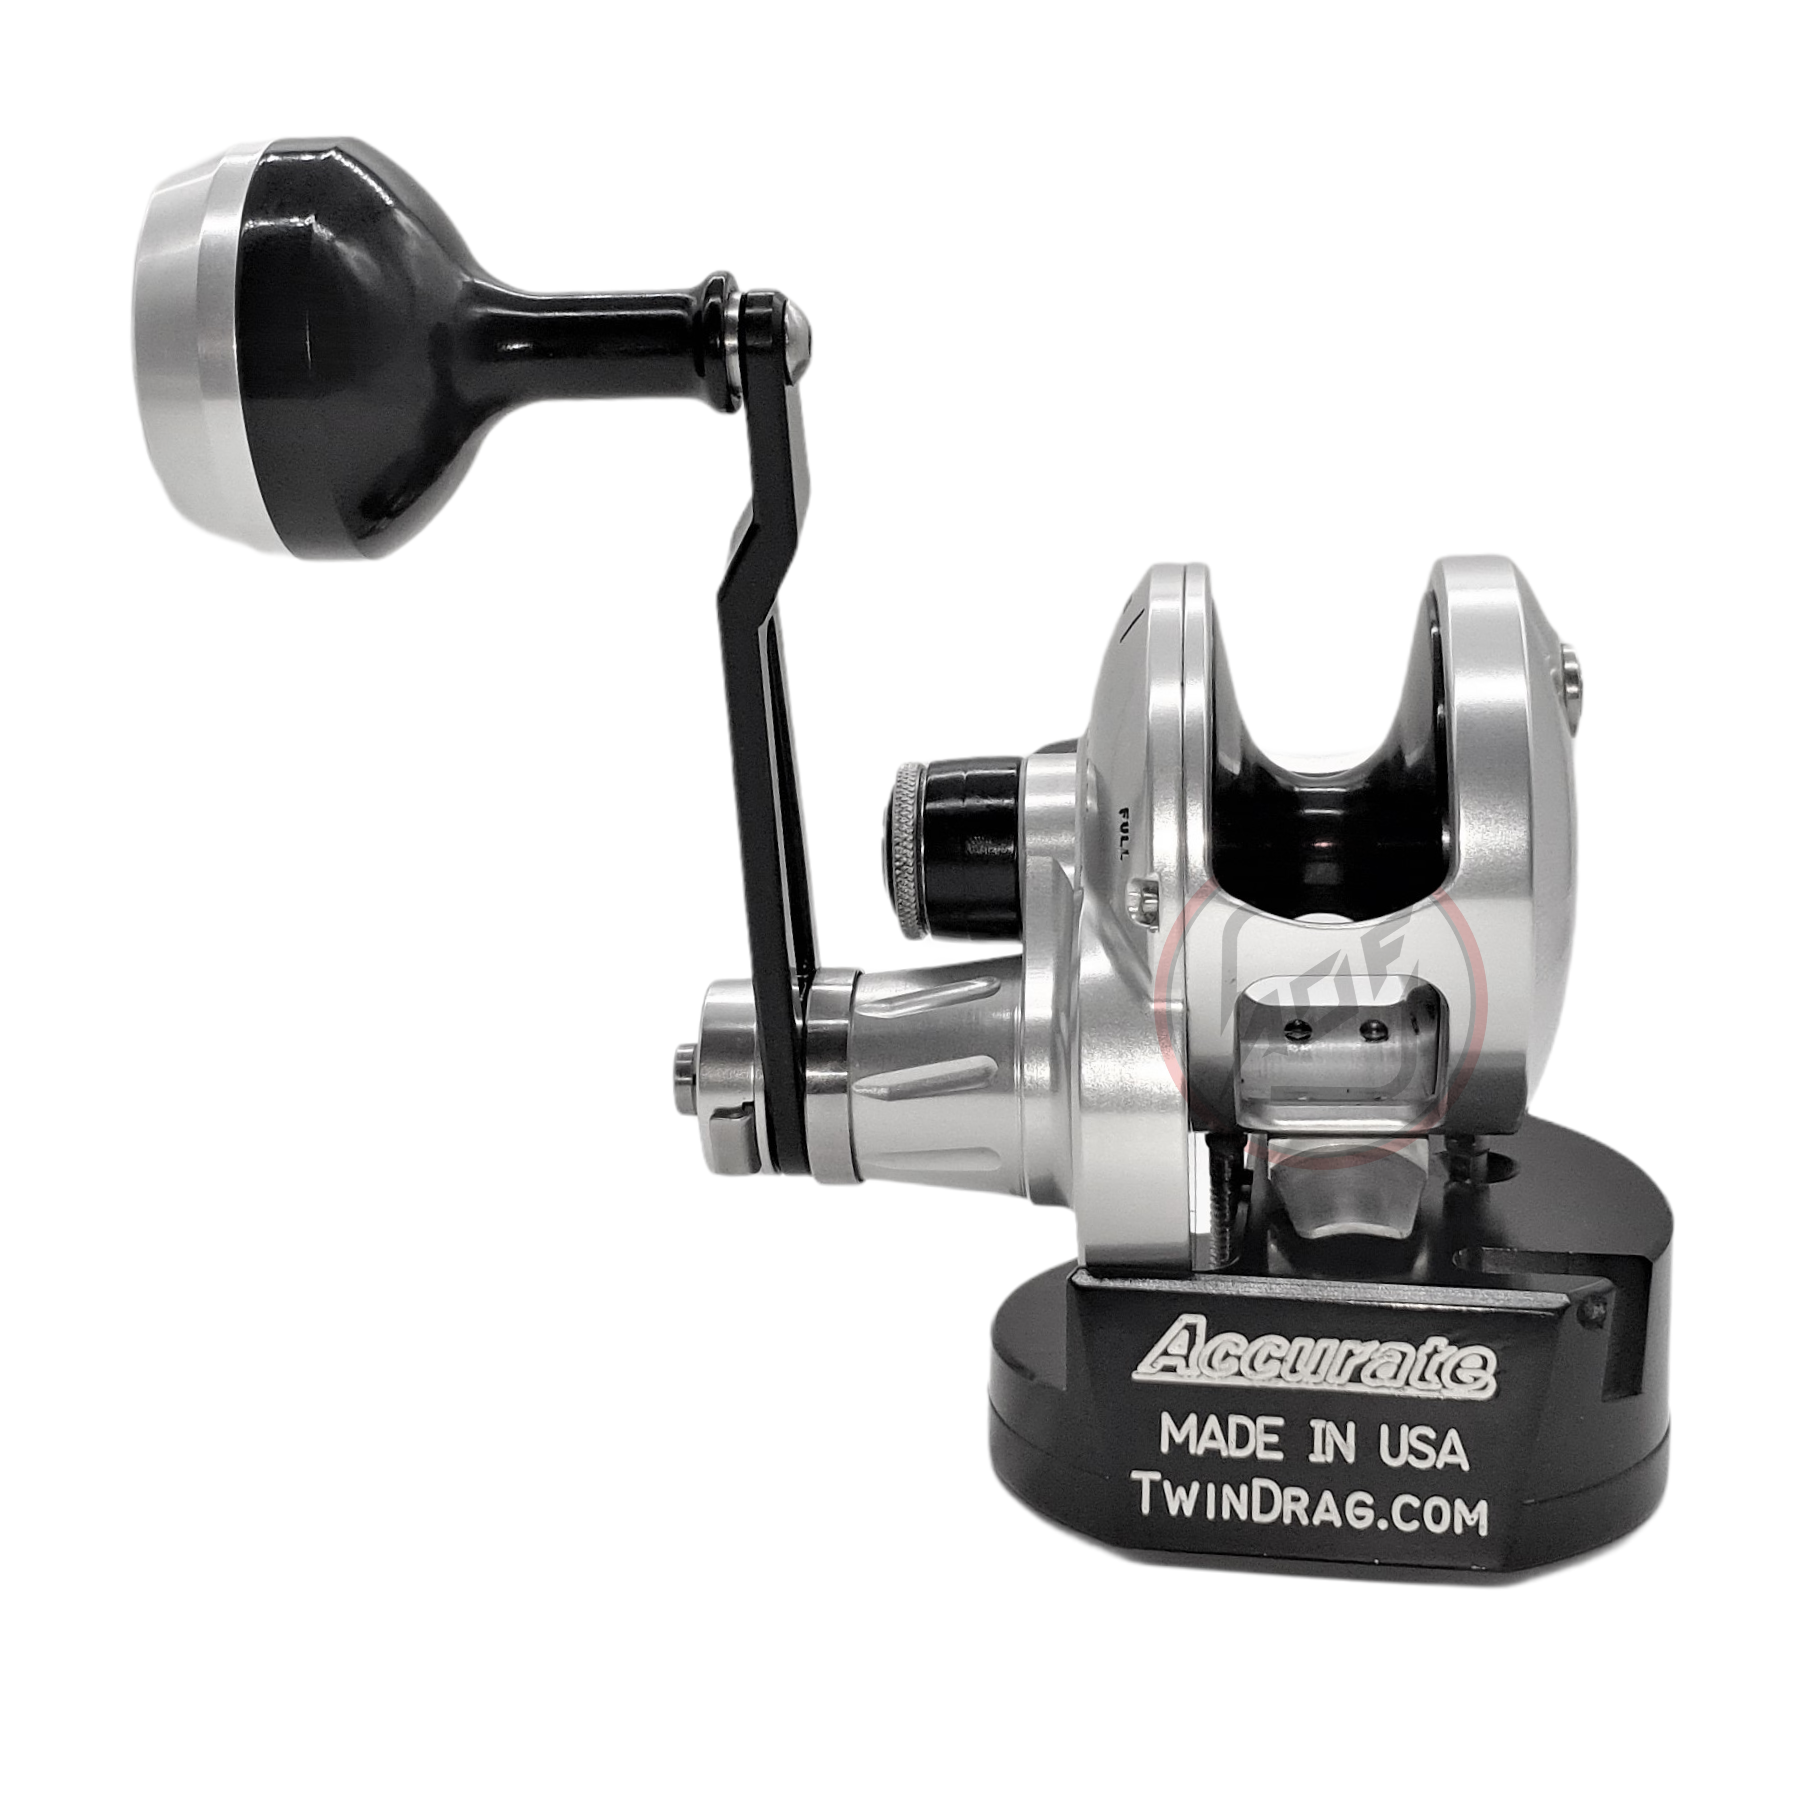 Accurate Valiant 500 Two Speed Reel - BV2-500N-S - Silver - Right-Hand